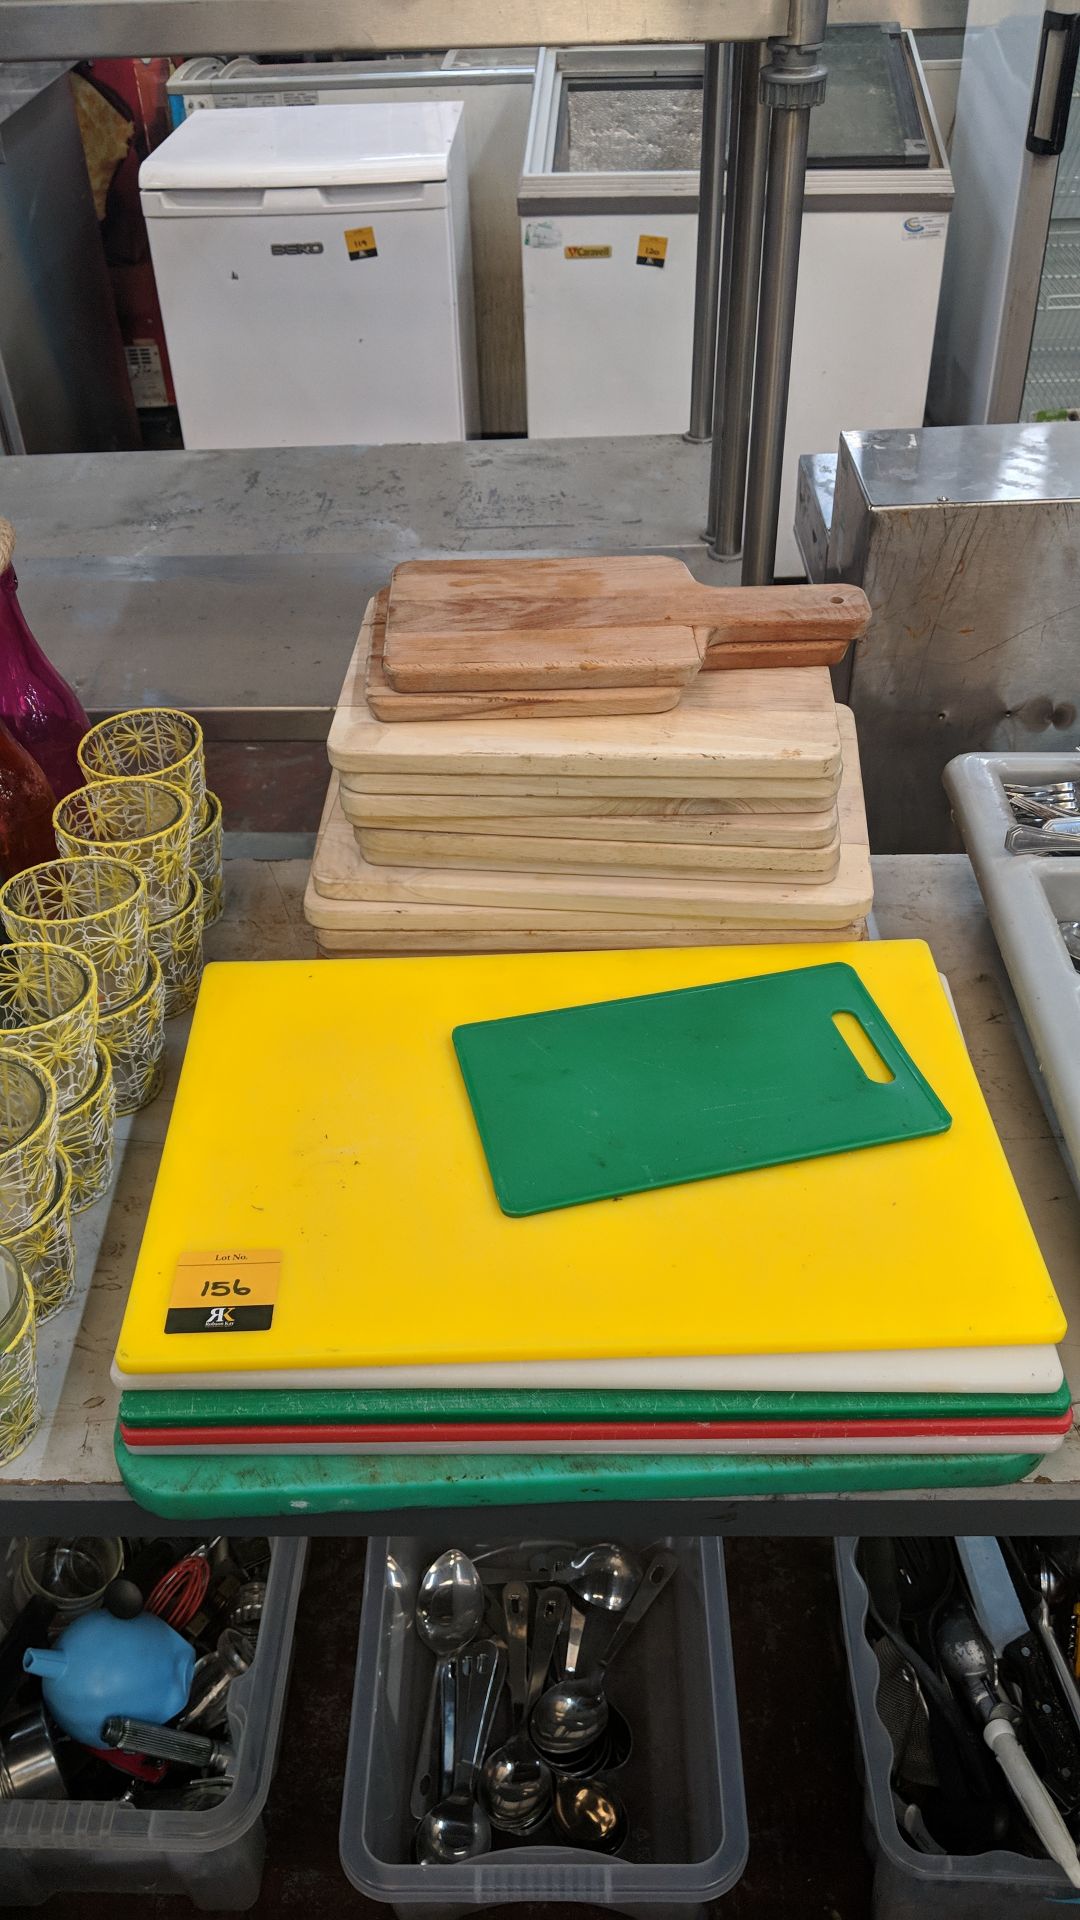 2 stacks of chopping boards, in plastic & wood IMPORTANT: Please remember goods successfully bid